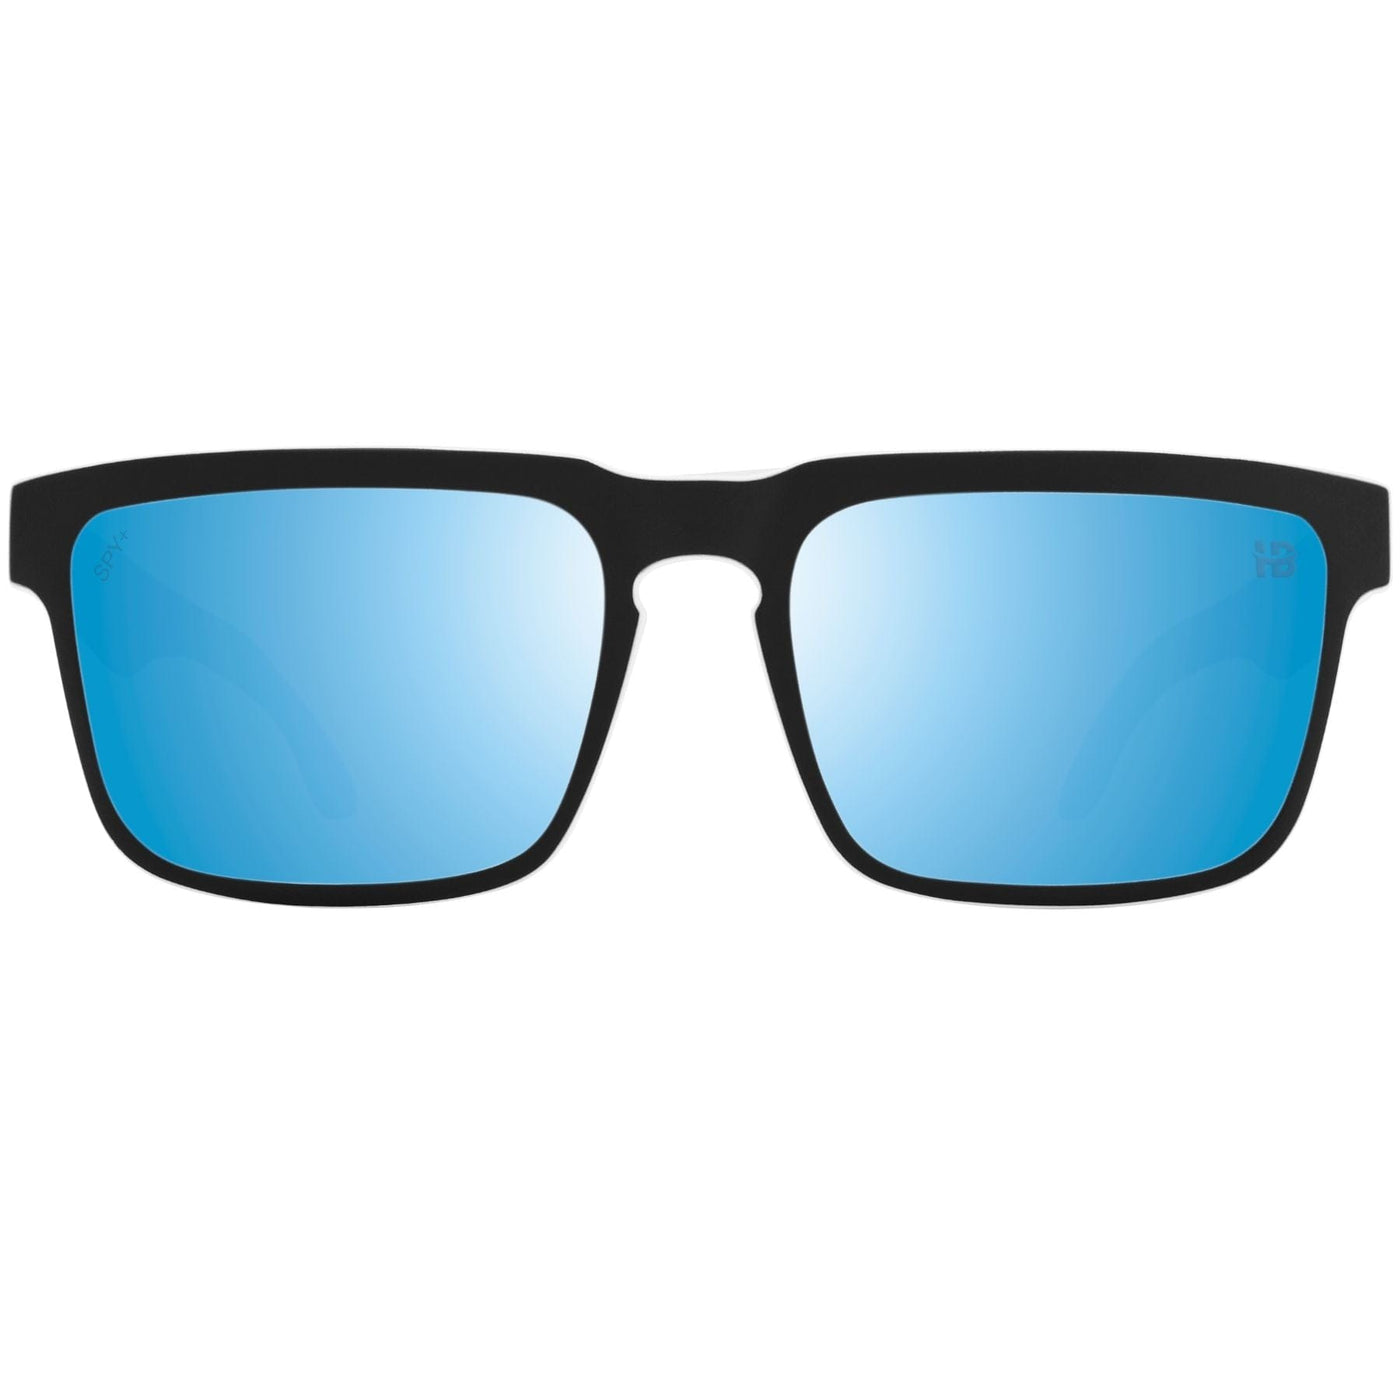 SPY HELM Polarized Sunglasses, Happy BOOST - Blue 8Lines Shop - Fast Shipping